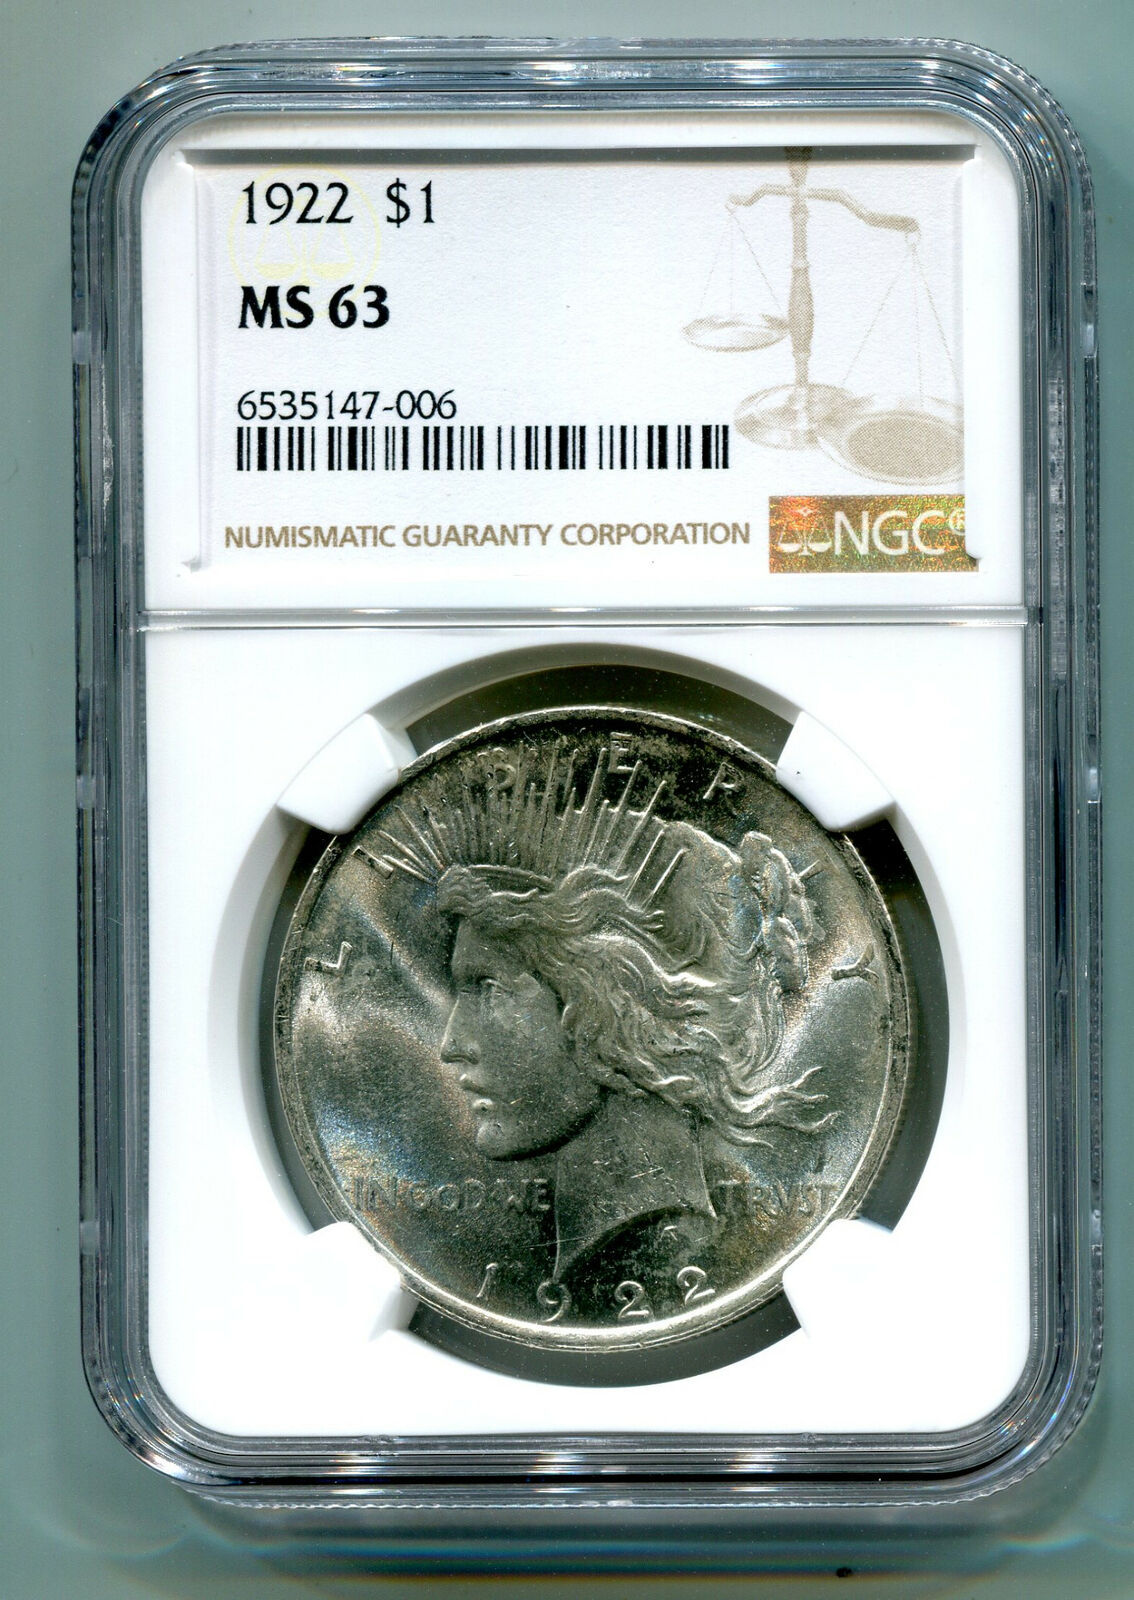 Primary image for 1922 PEACE SILVER DOLLAR NGC MS63 NICE ORIGINAL COIN PREMIUM QUALITY PQ